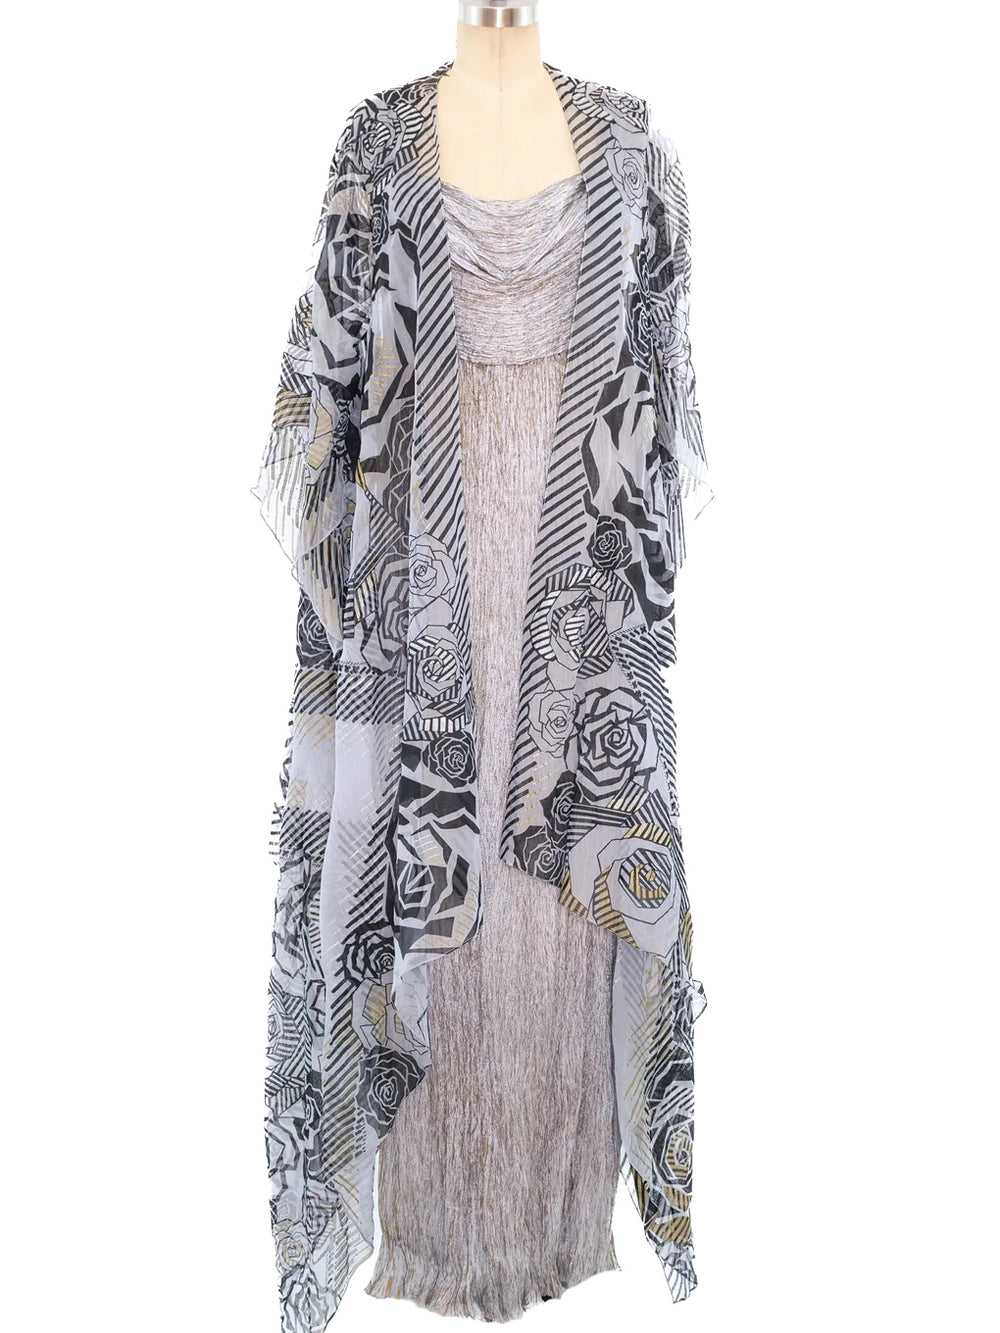 Zandra Rhodes Pleated Column Dress with Duster - image 1